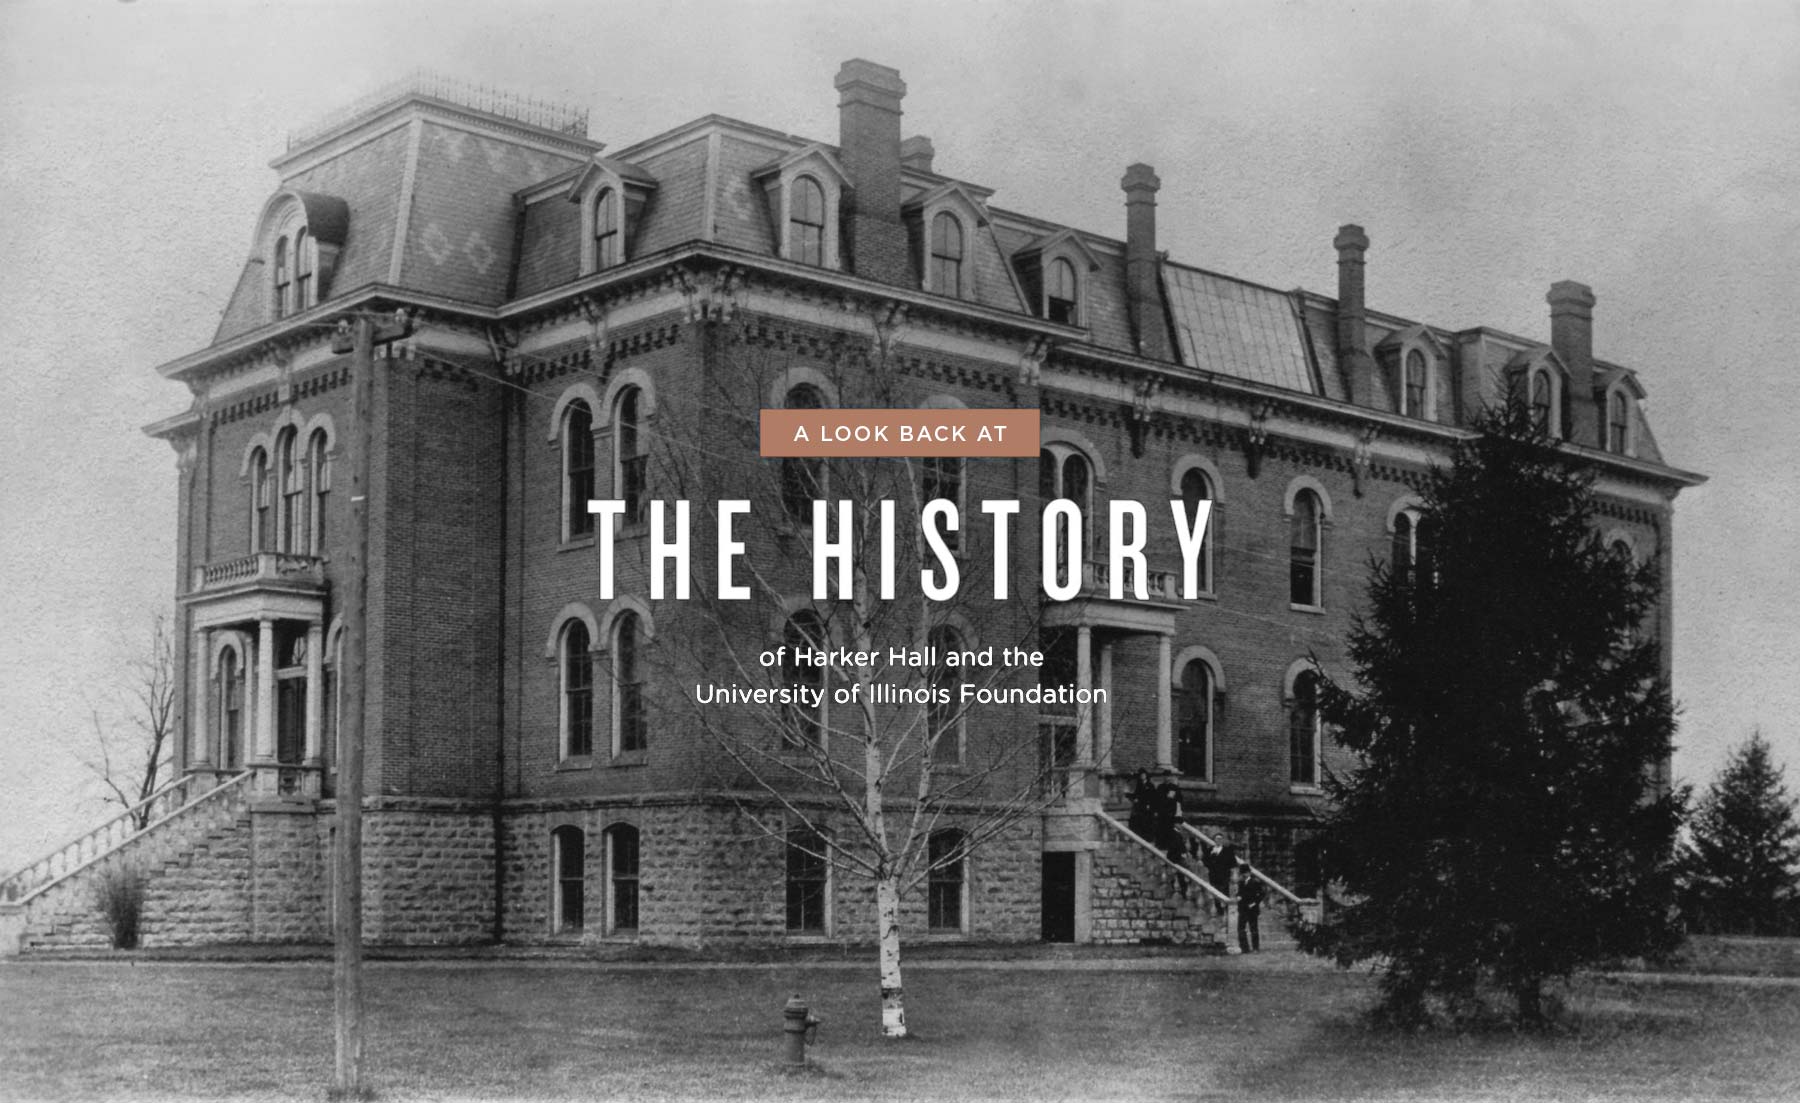 A look back at the history of Harker Hall and the University of Illinois Foundation